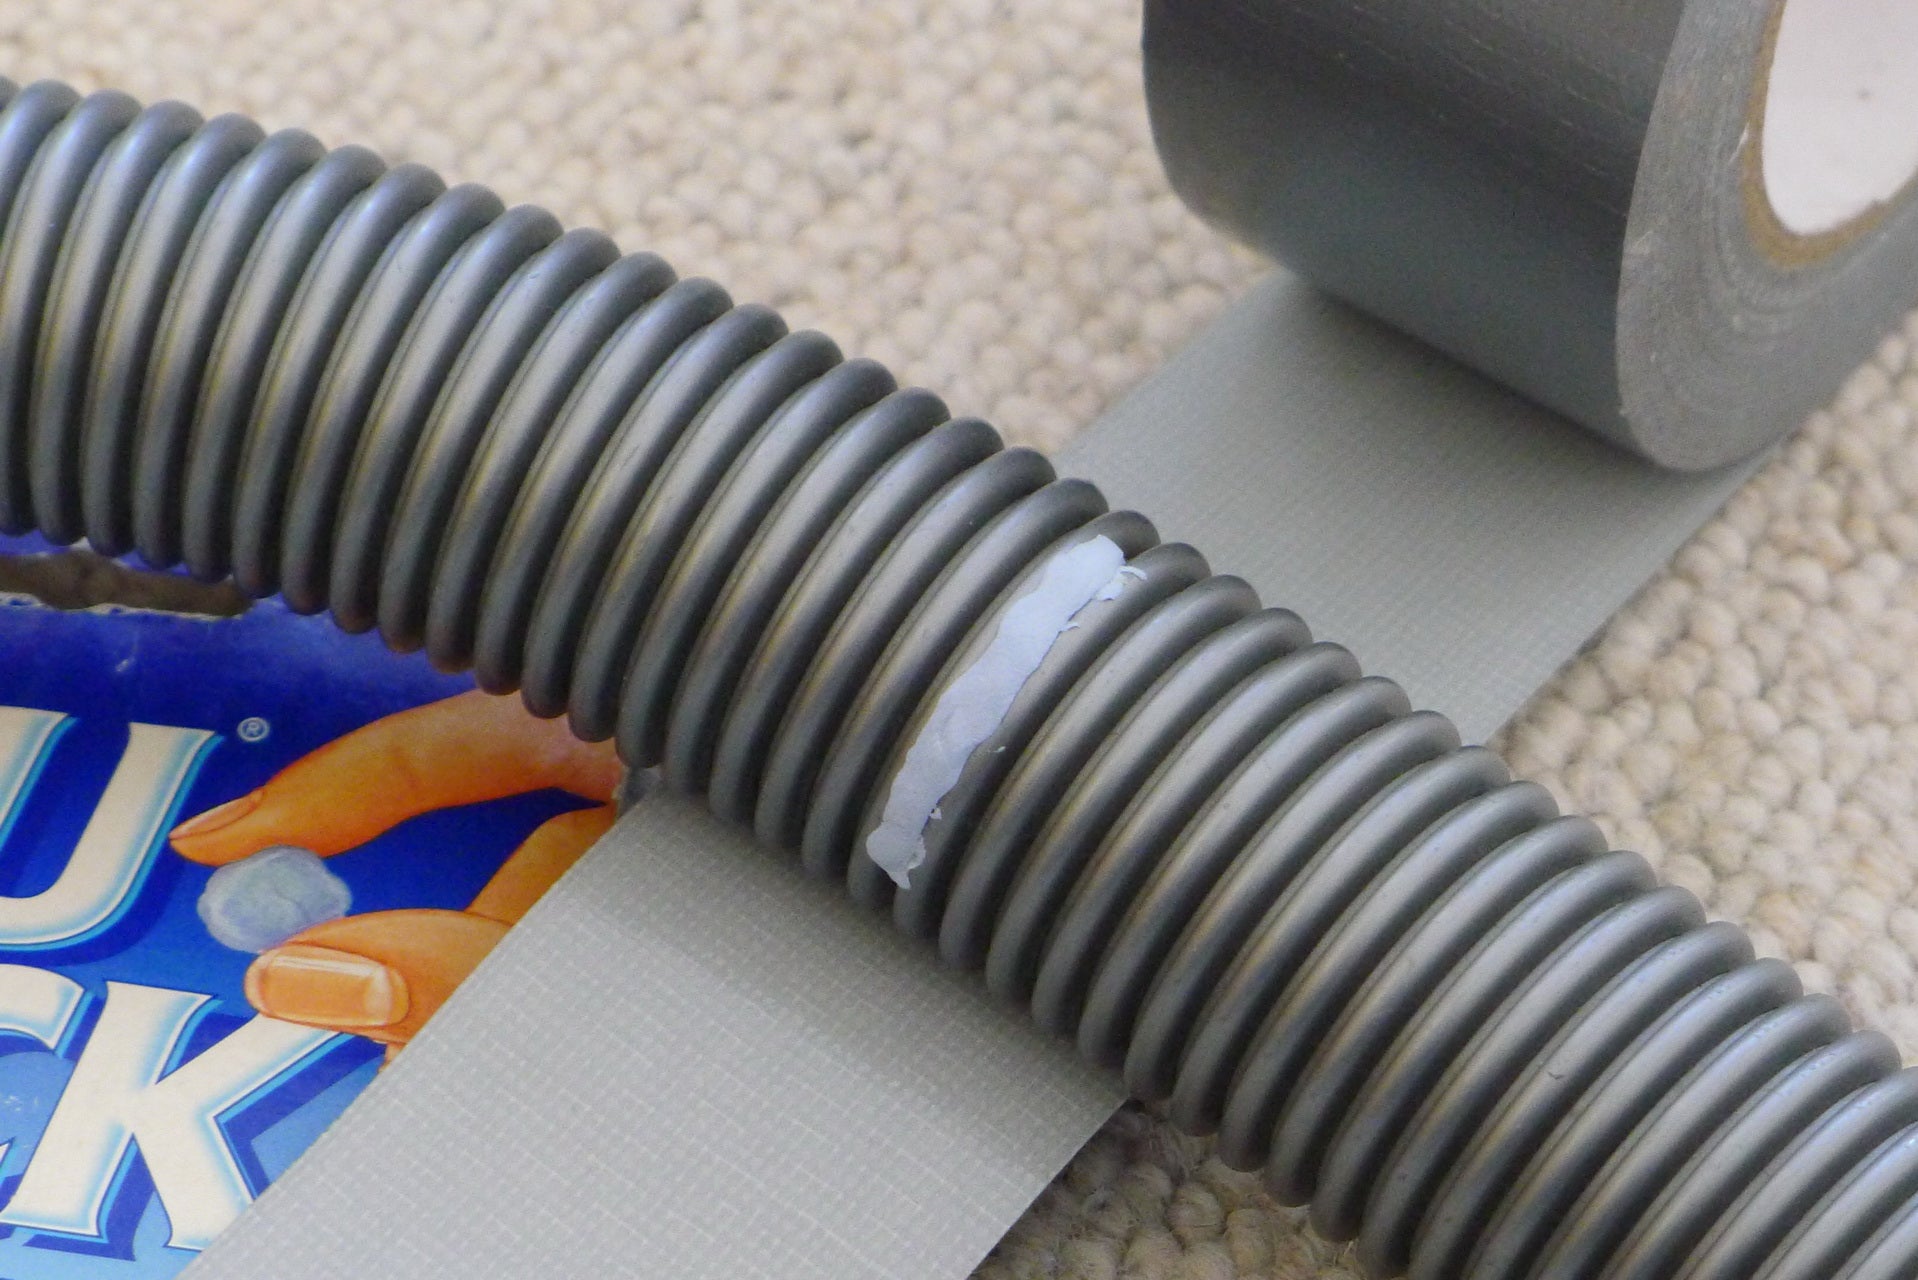 Patching a vacuum hose with Blu Tak and masking tape